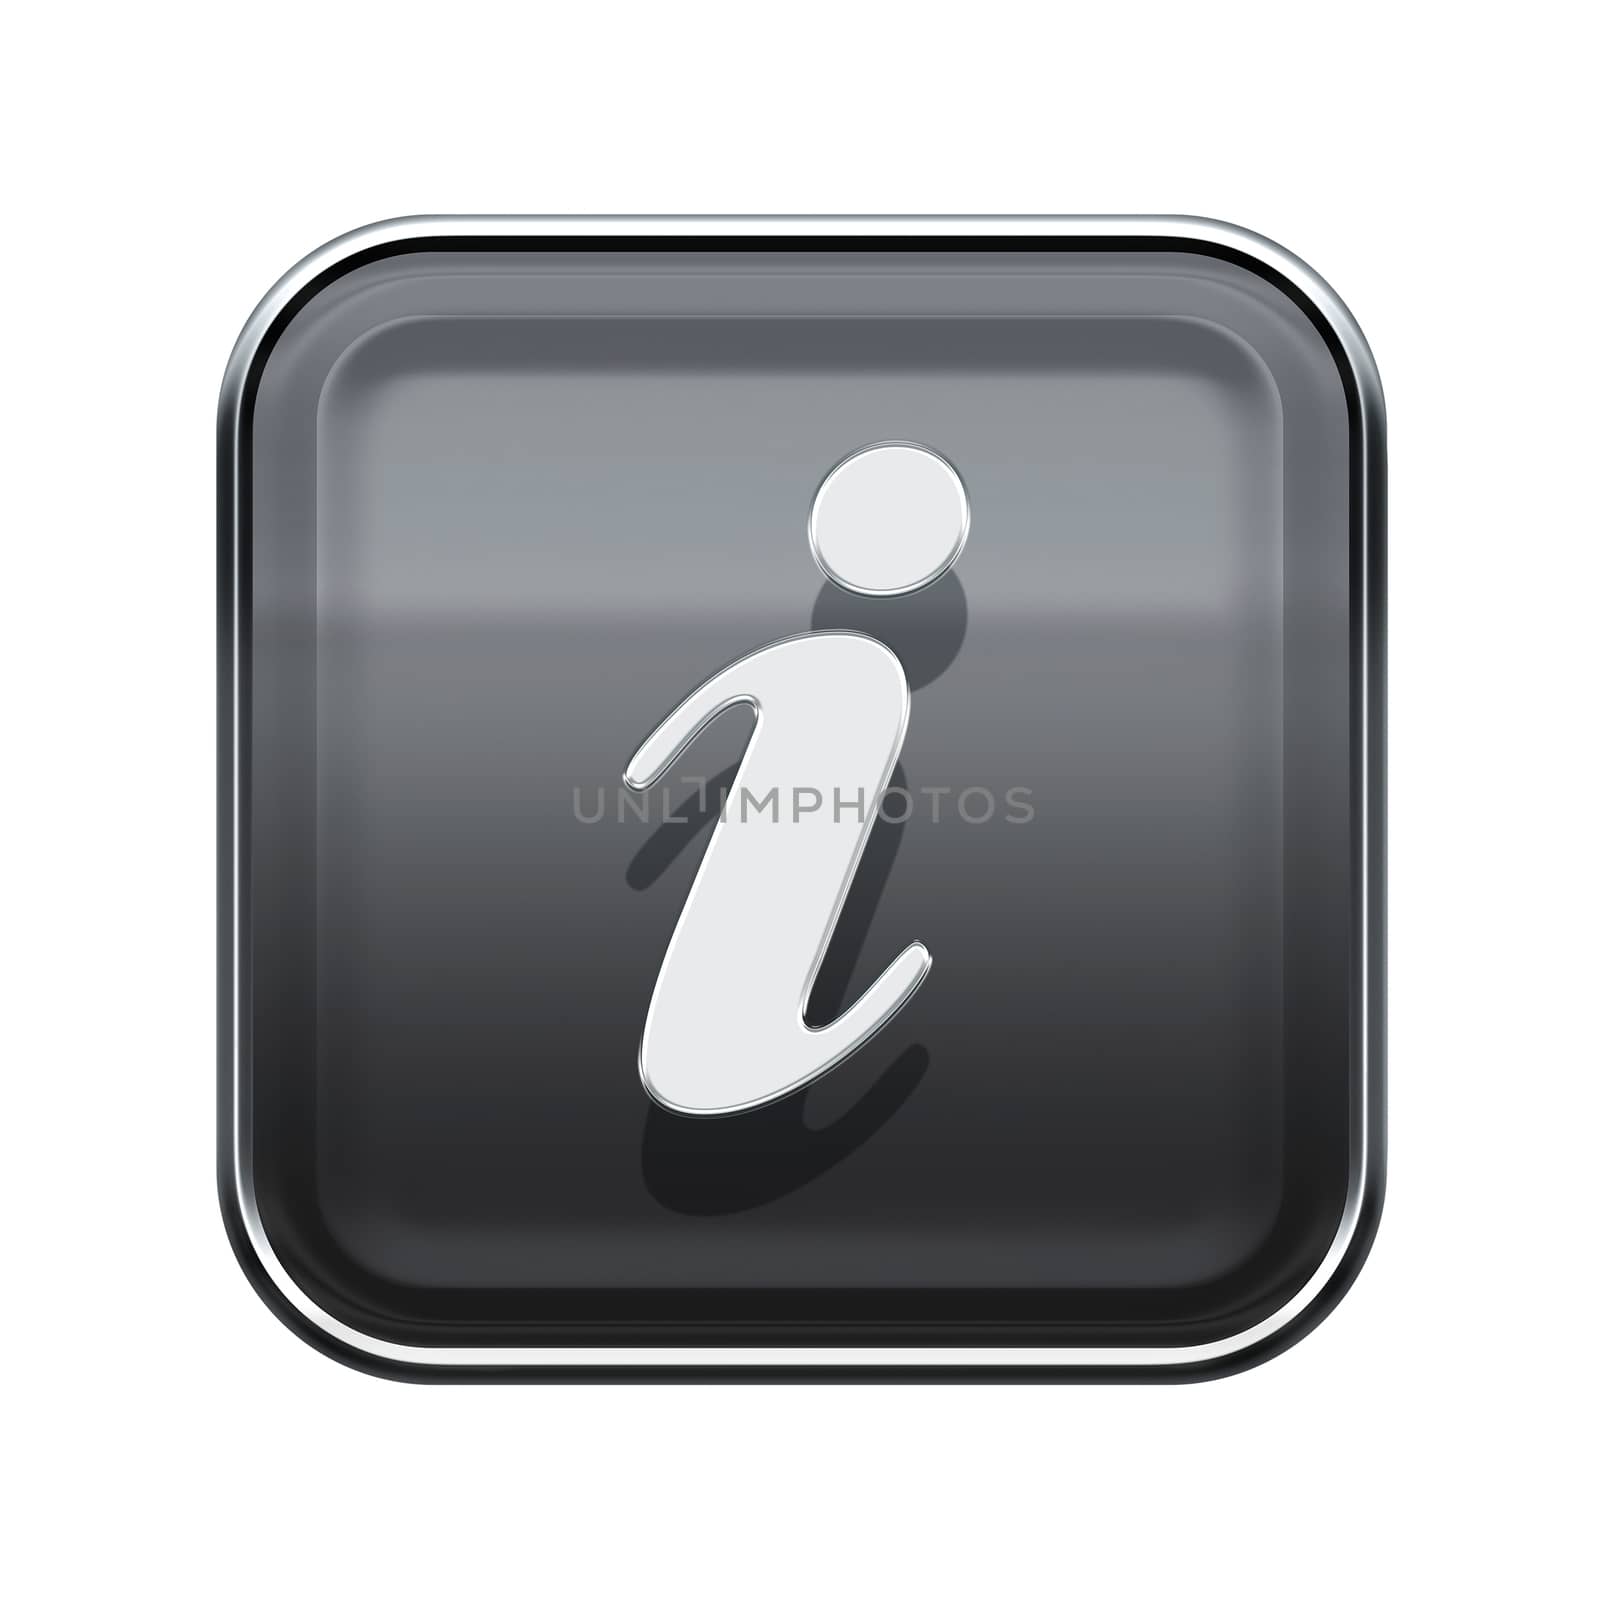 Information icon glossy grey, isolated on white background